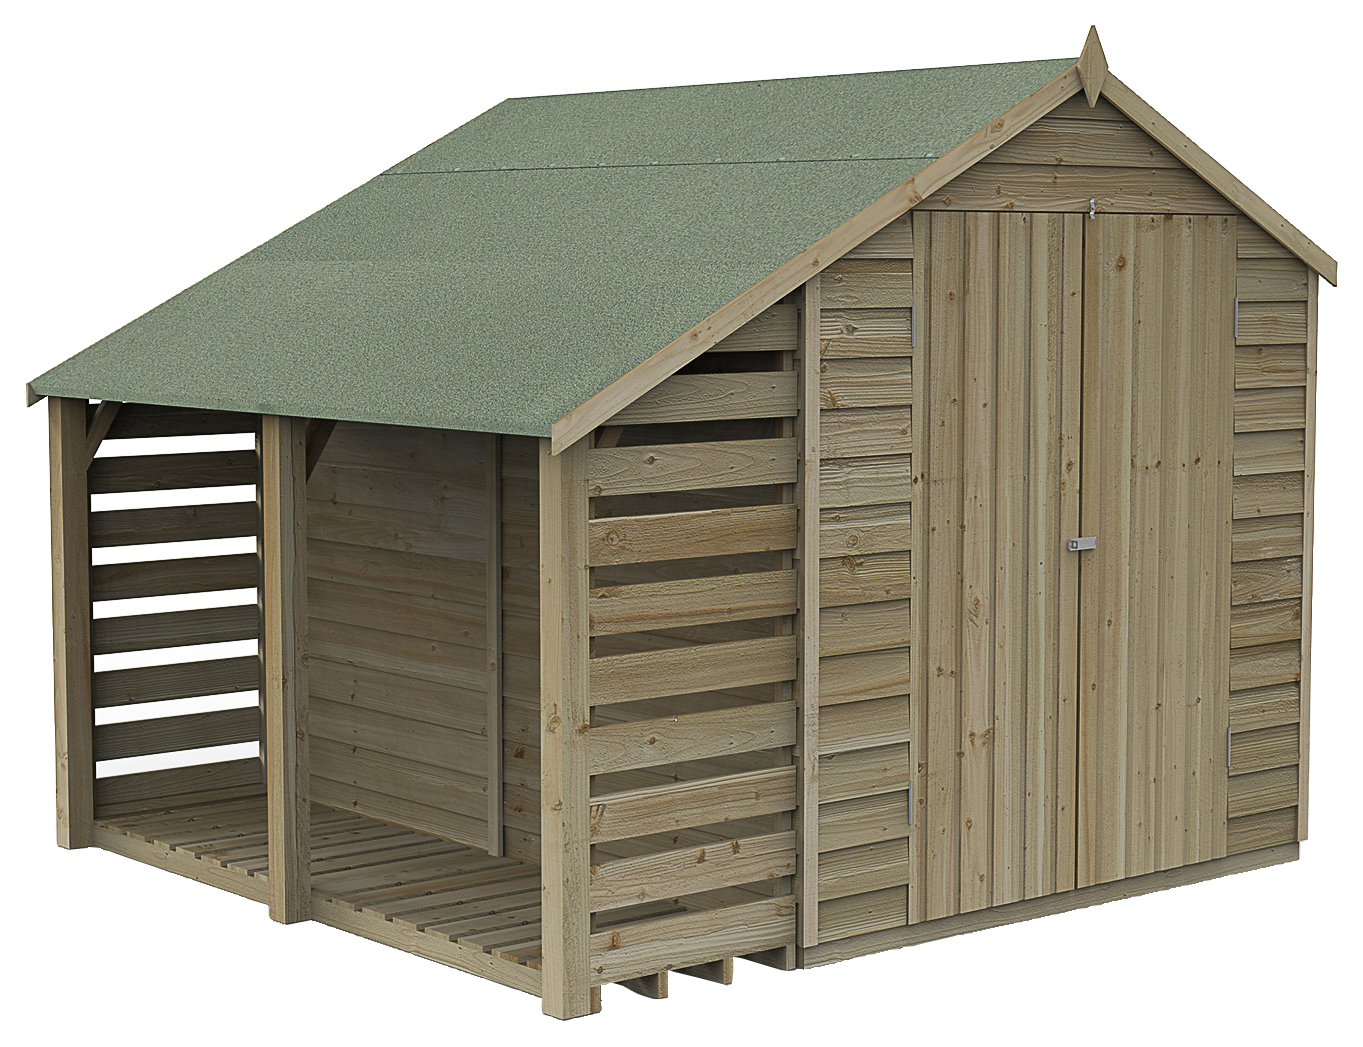 Image of Forest Garden 8 x 6ft 4Life Apex Overlap Pressure Treated Double Door Shed with Lean-To